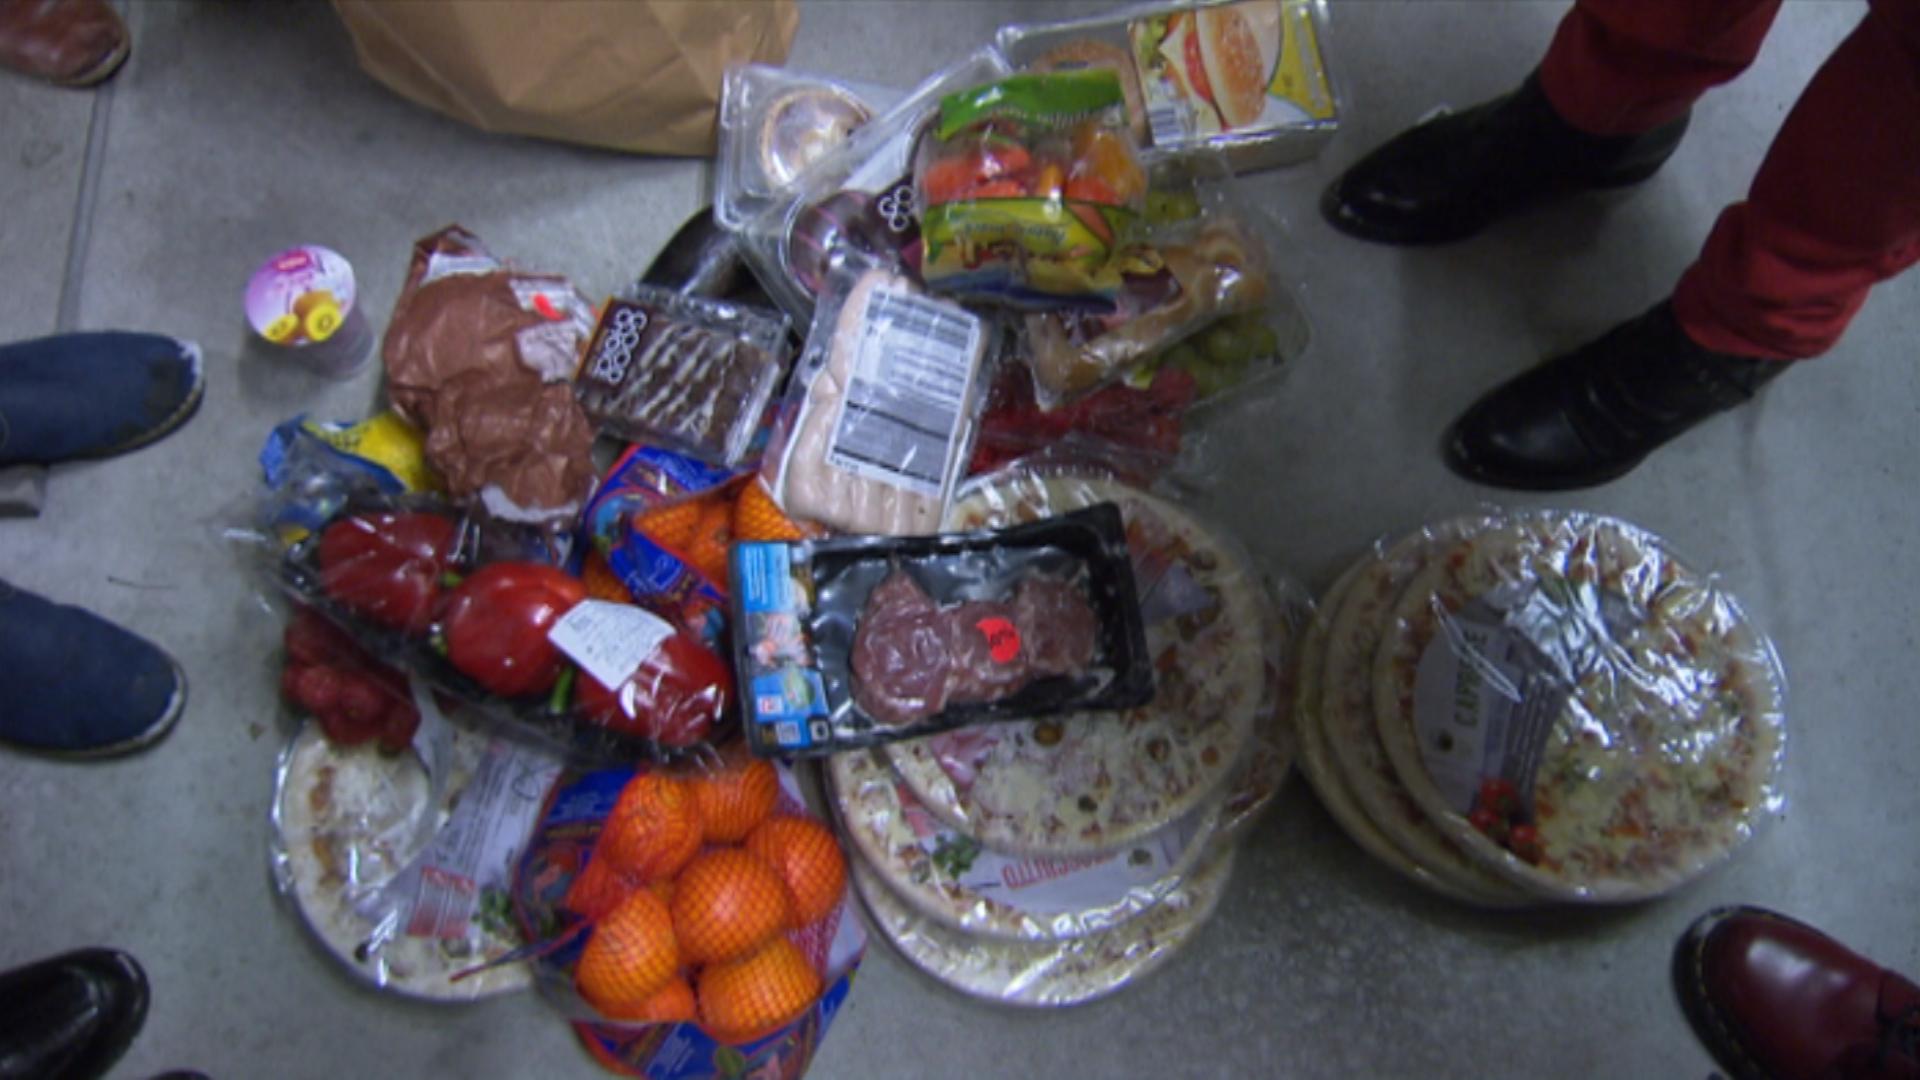 Food that were collected by the dumpster divers